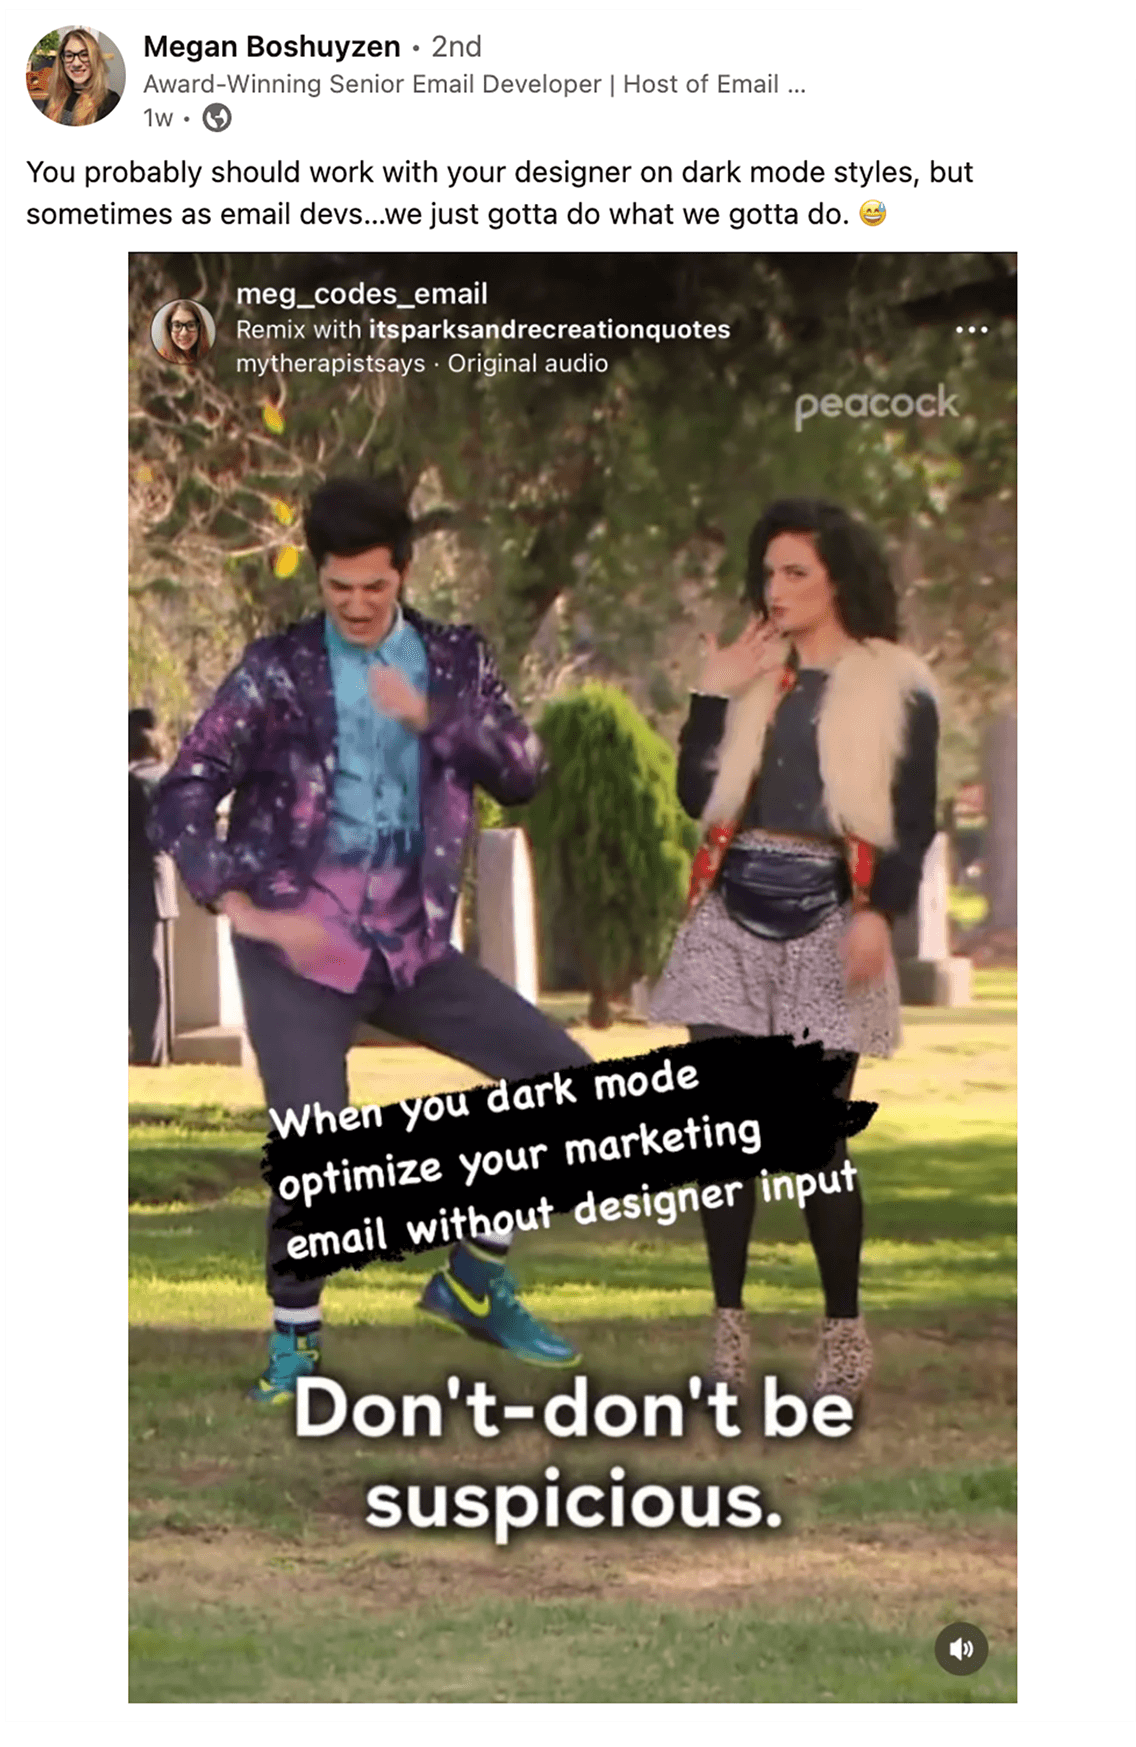 Megan Boshuyzen on LinkedIn says 'you probably should work with your designer on dark mode styles, but sometimes as email devs... we just gotta do what we gotta do' with a meme of Jean-Ralphio and Mona-Lisa Saperstein from Parks and Rec singing 'Don't-don't be suspicious'